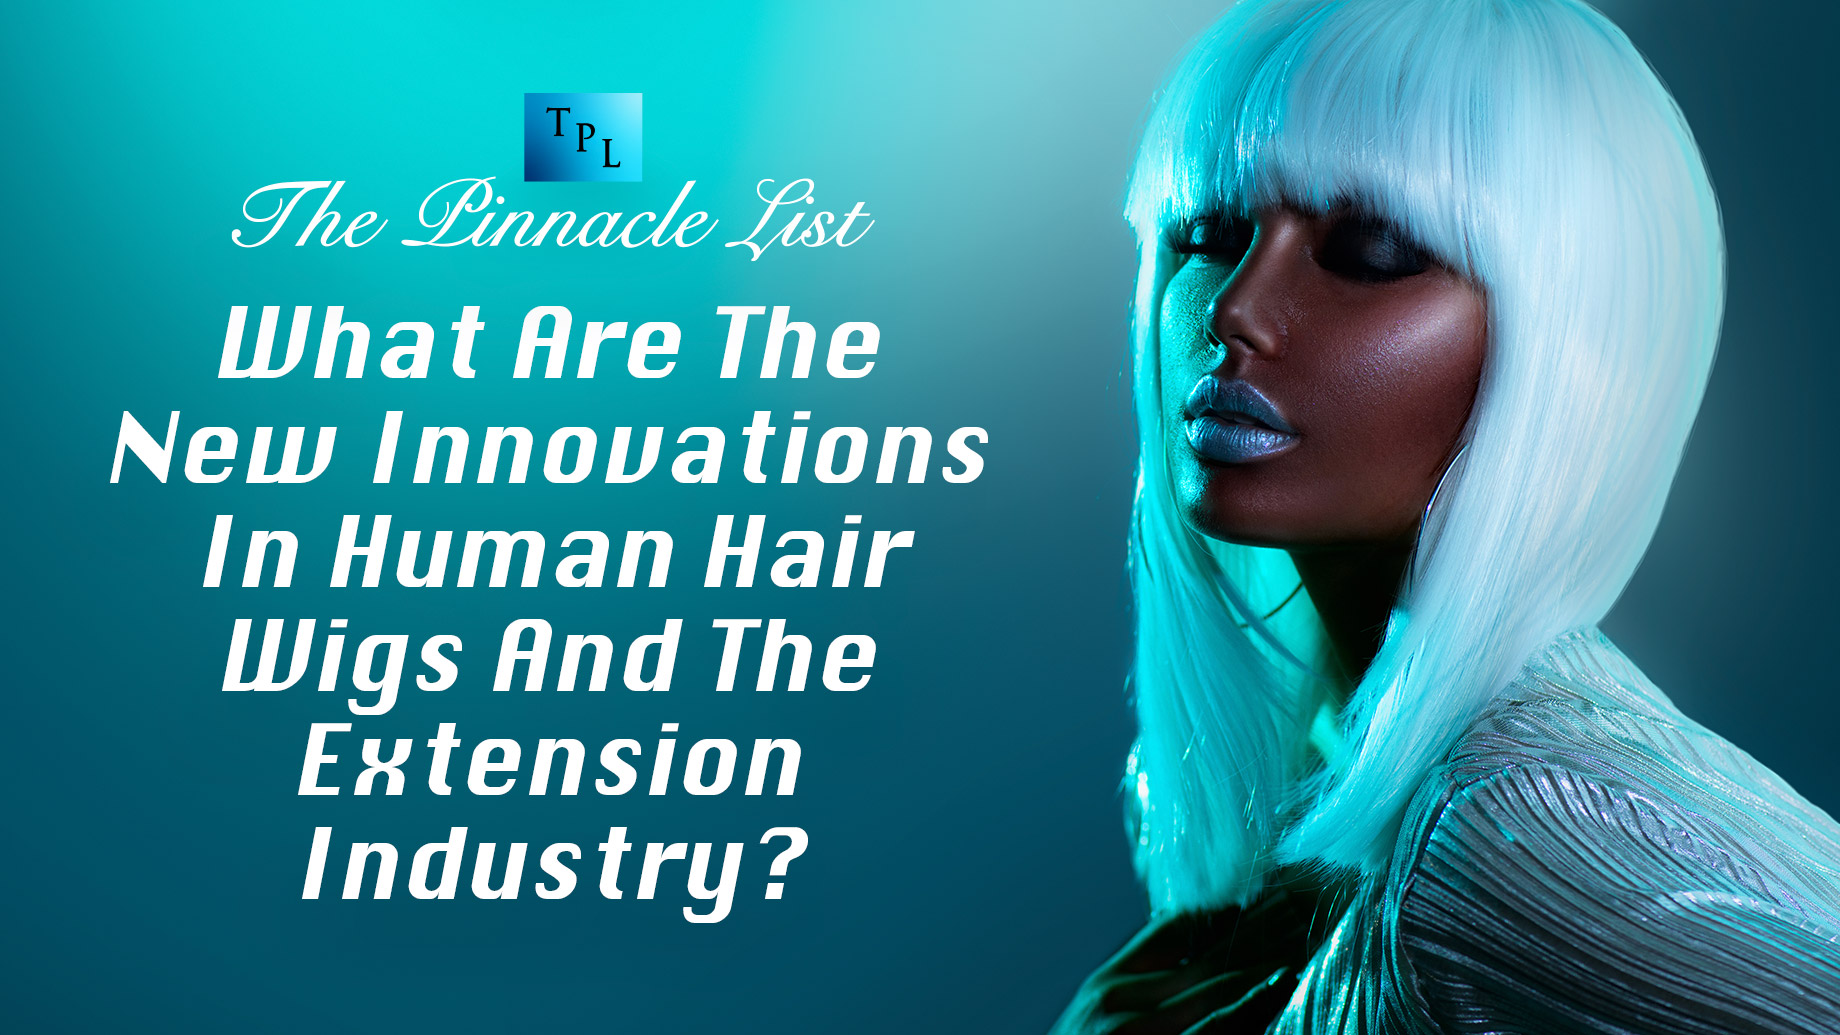 What Are The New Innovations In Human Hair Wigs And The Extension Industry?